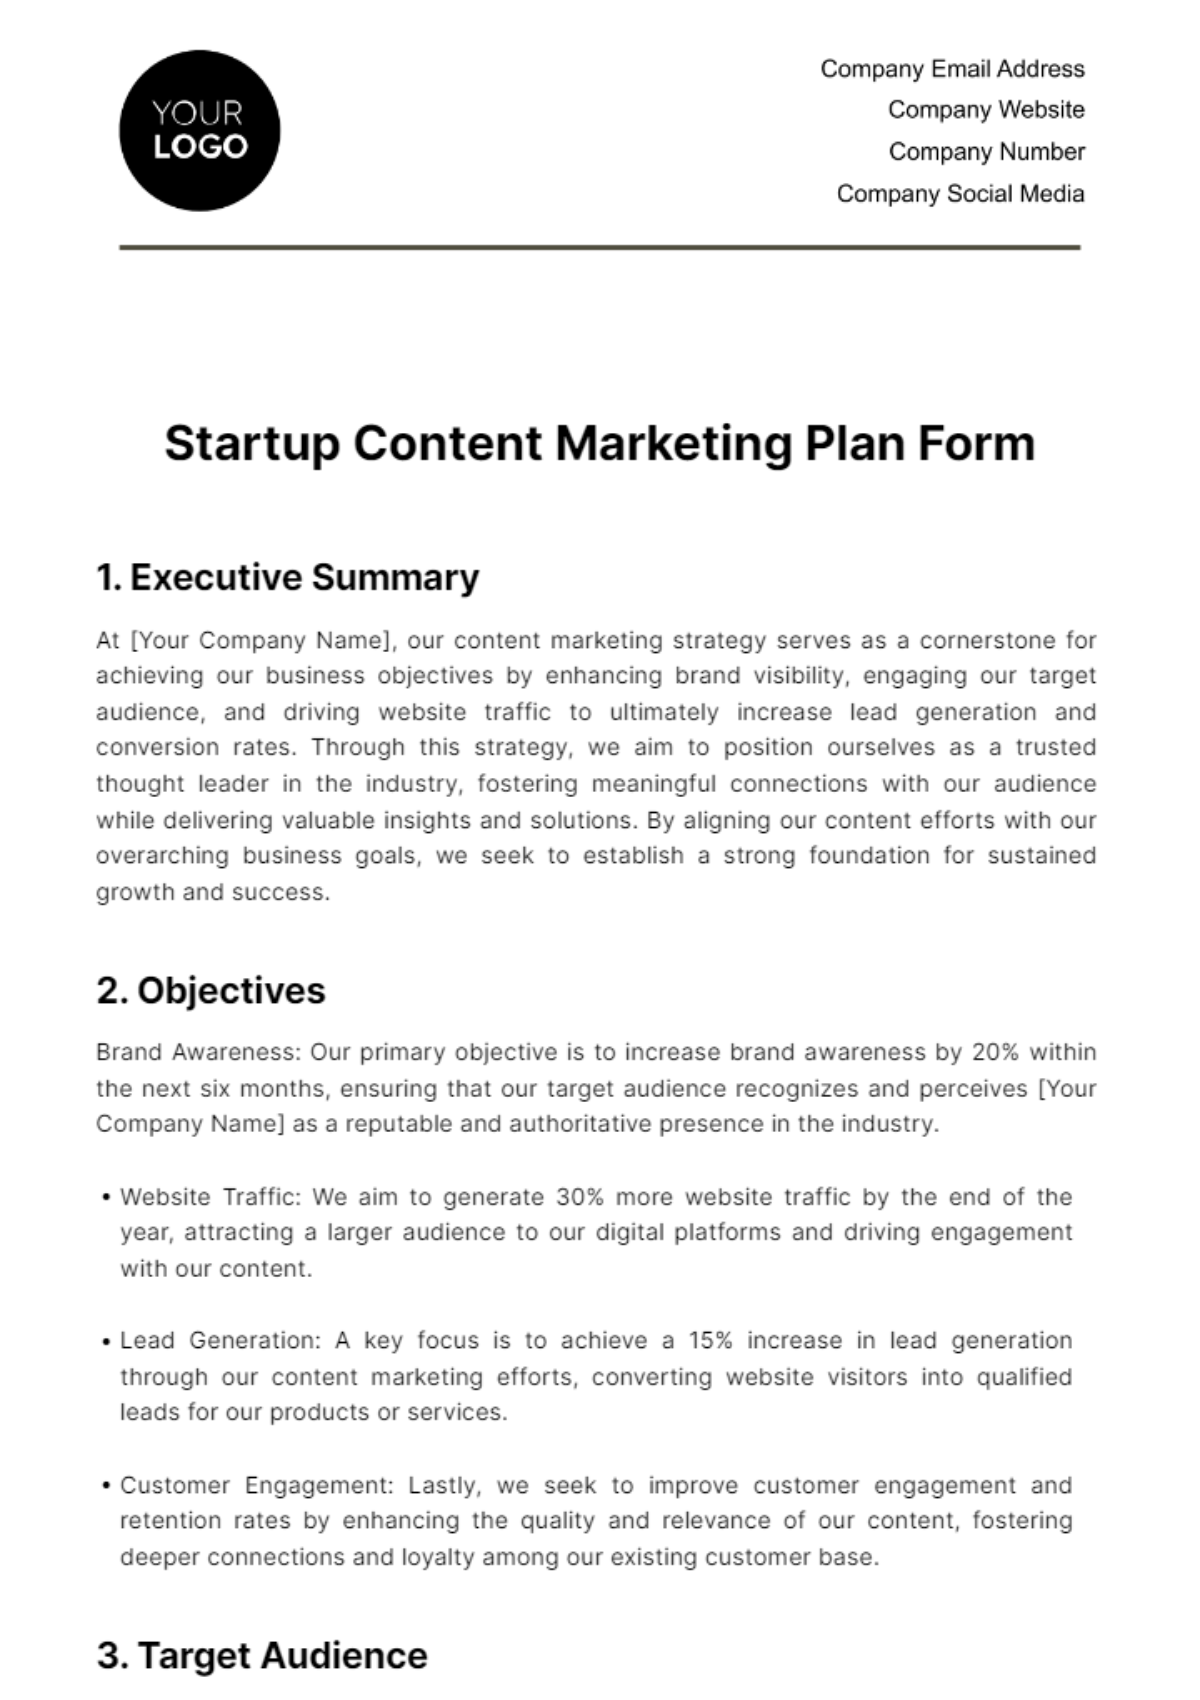 Startup Content Marketing Plan Form Template